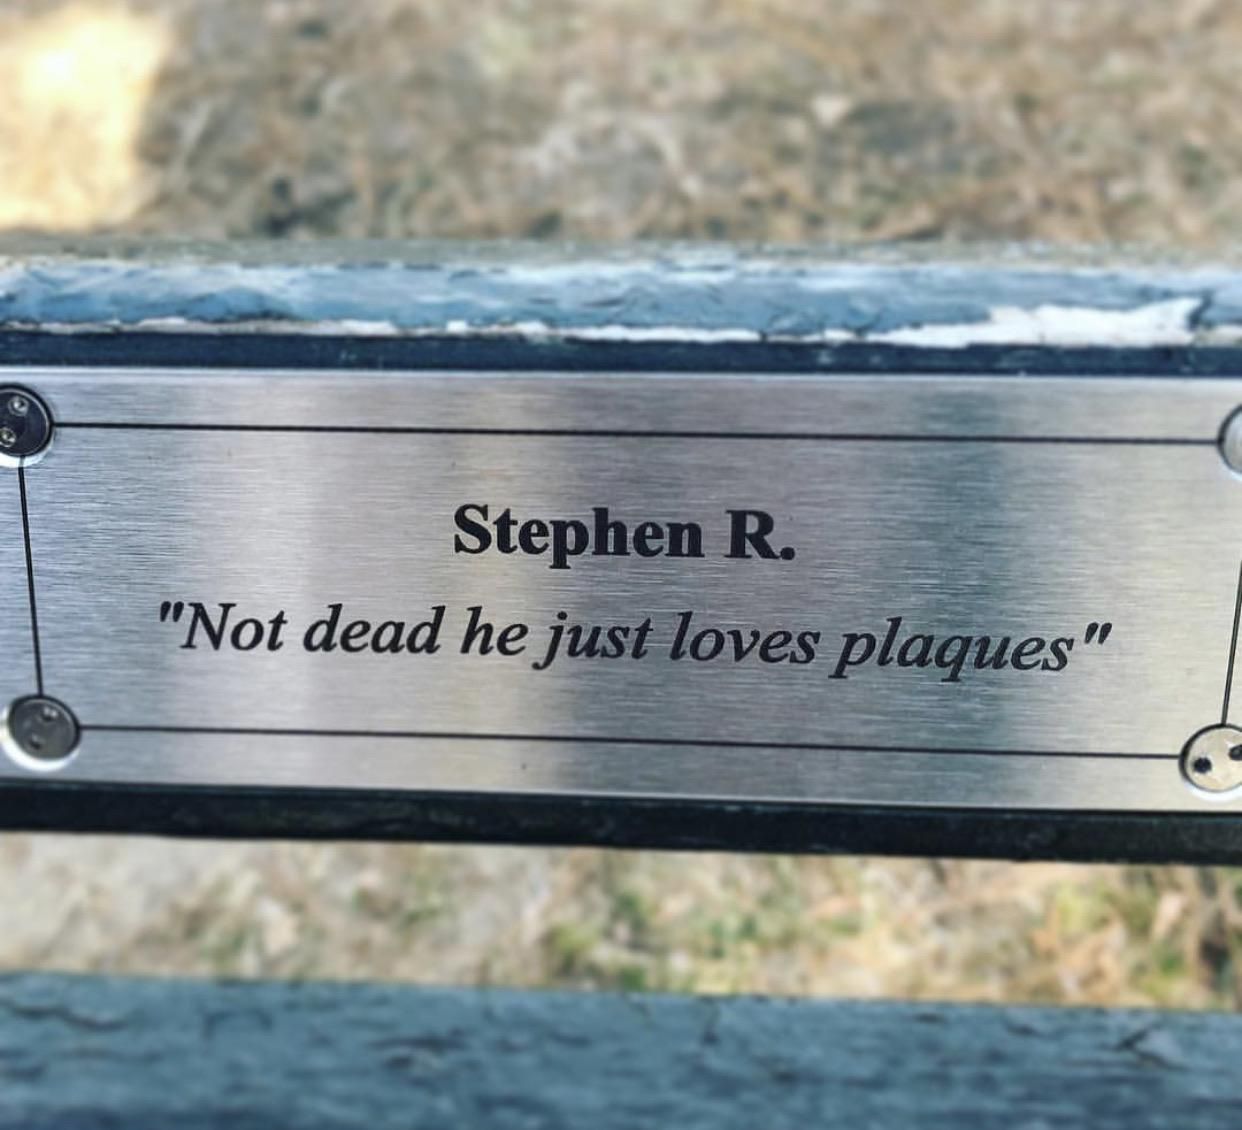 Found in Central Park. Stephen, if you're out there, keep doing you.